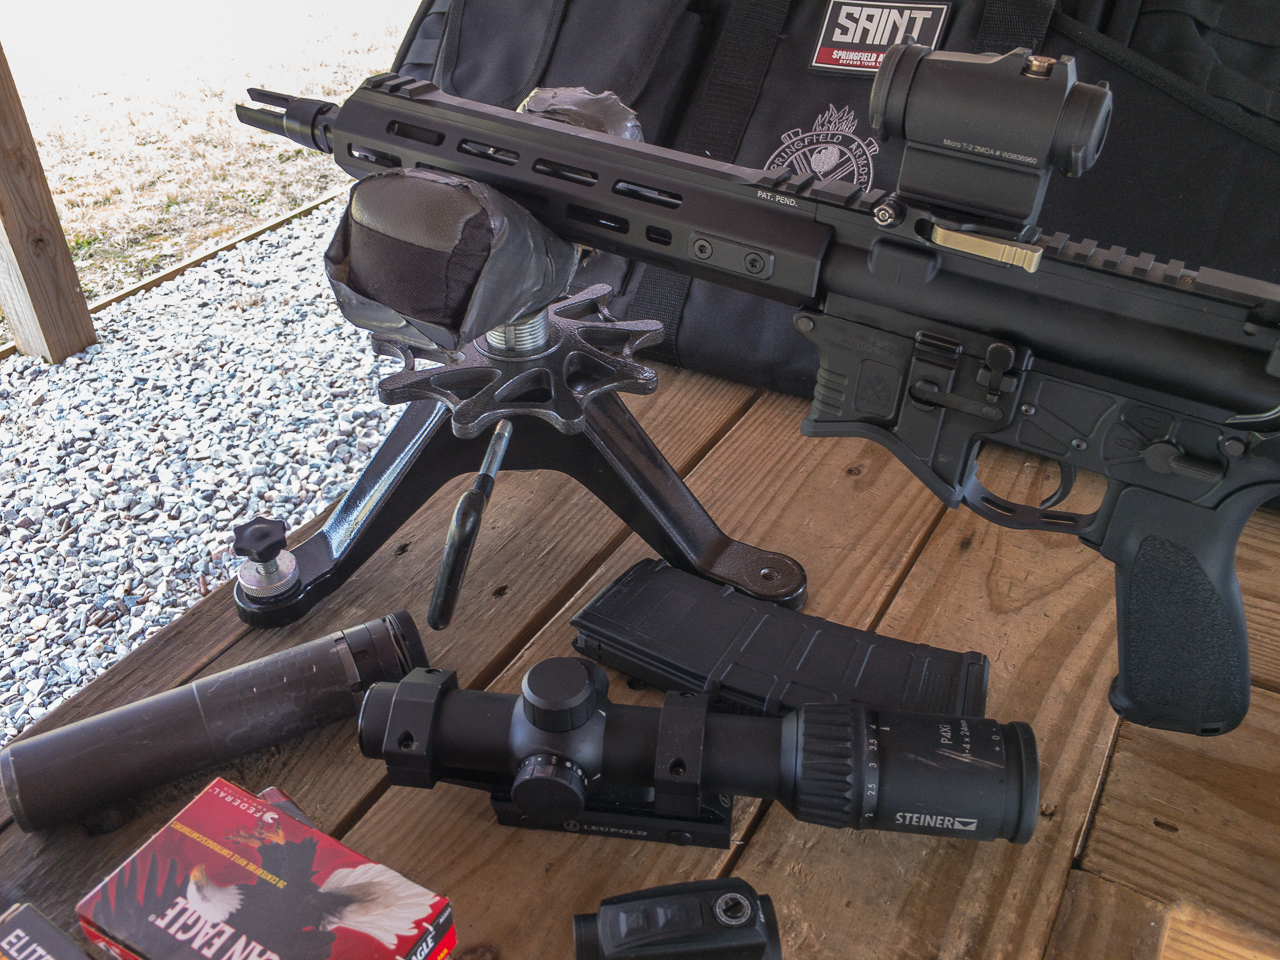 We tested the SAINT Edge Pistol with a variety of optics including the new Crimson Trace red dot, Steiner P3TR and Aimpoint Micro T-2.